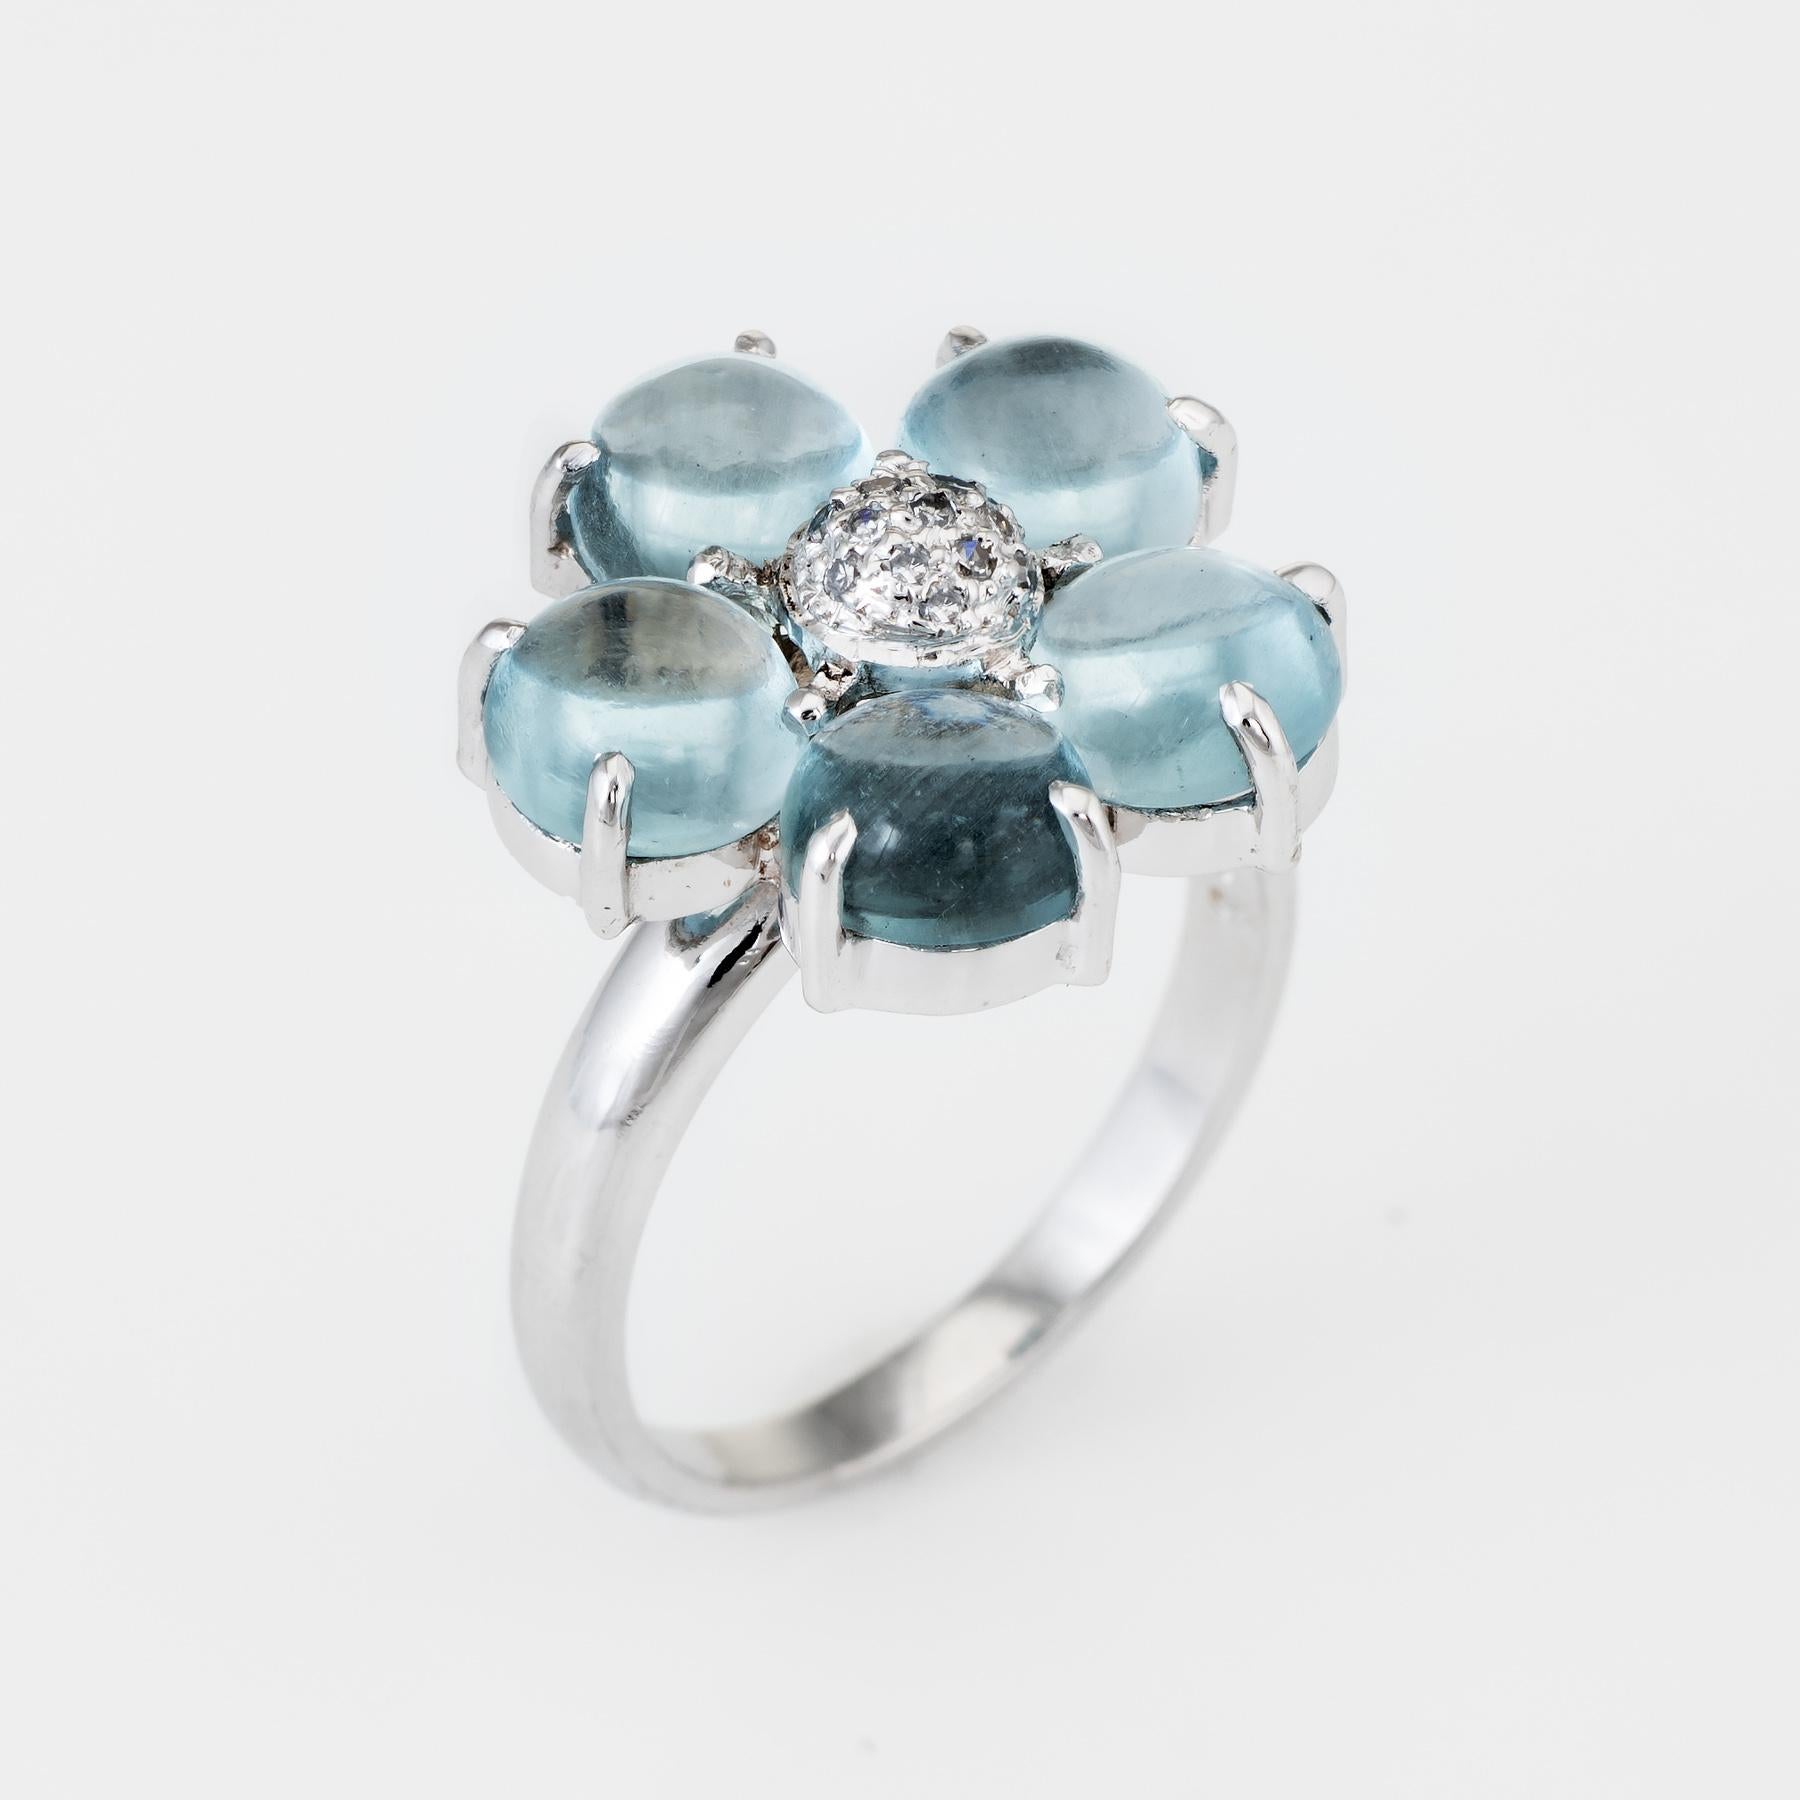 Charming vintage forget me not cocktail ring, crafted in 14 karat white gold. 

Cabochon cut aquamarines each measure 6mm (estimated at 1.25 carats each - 6.25 carats total estimated weight), accented with an estimated 0.13 carats of pave set single